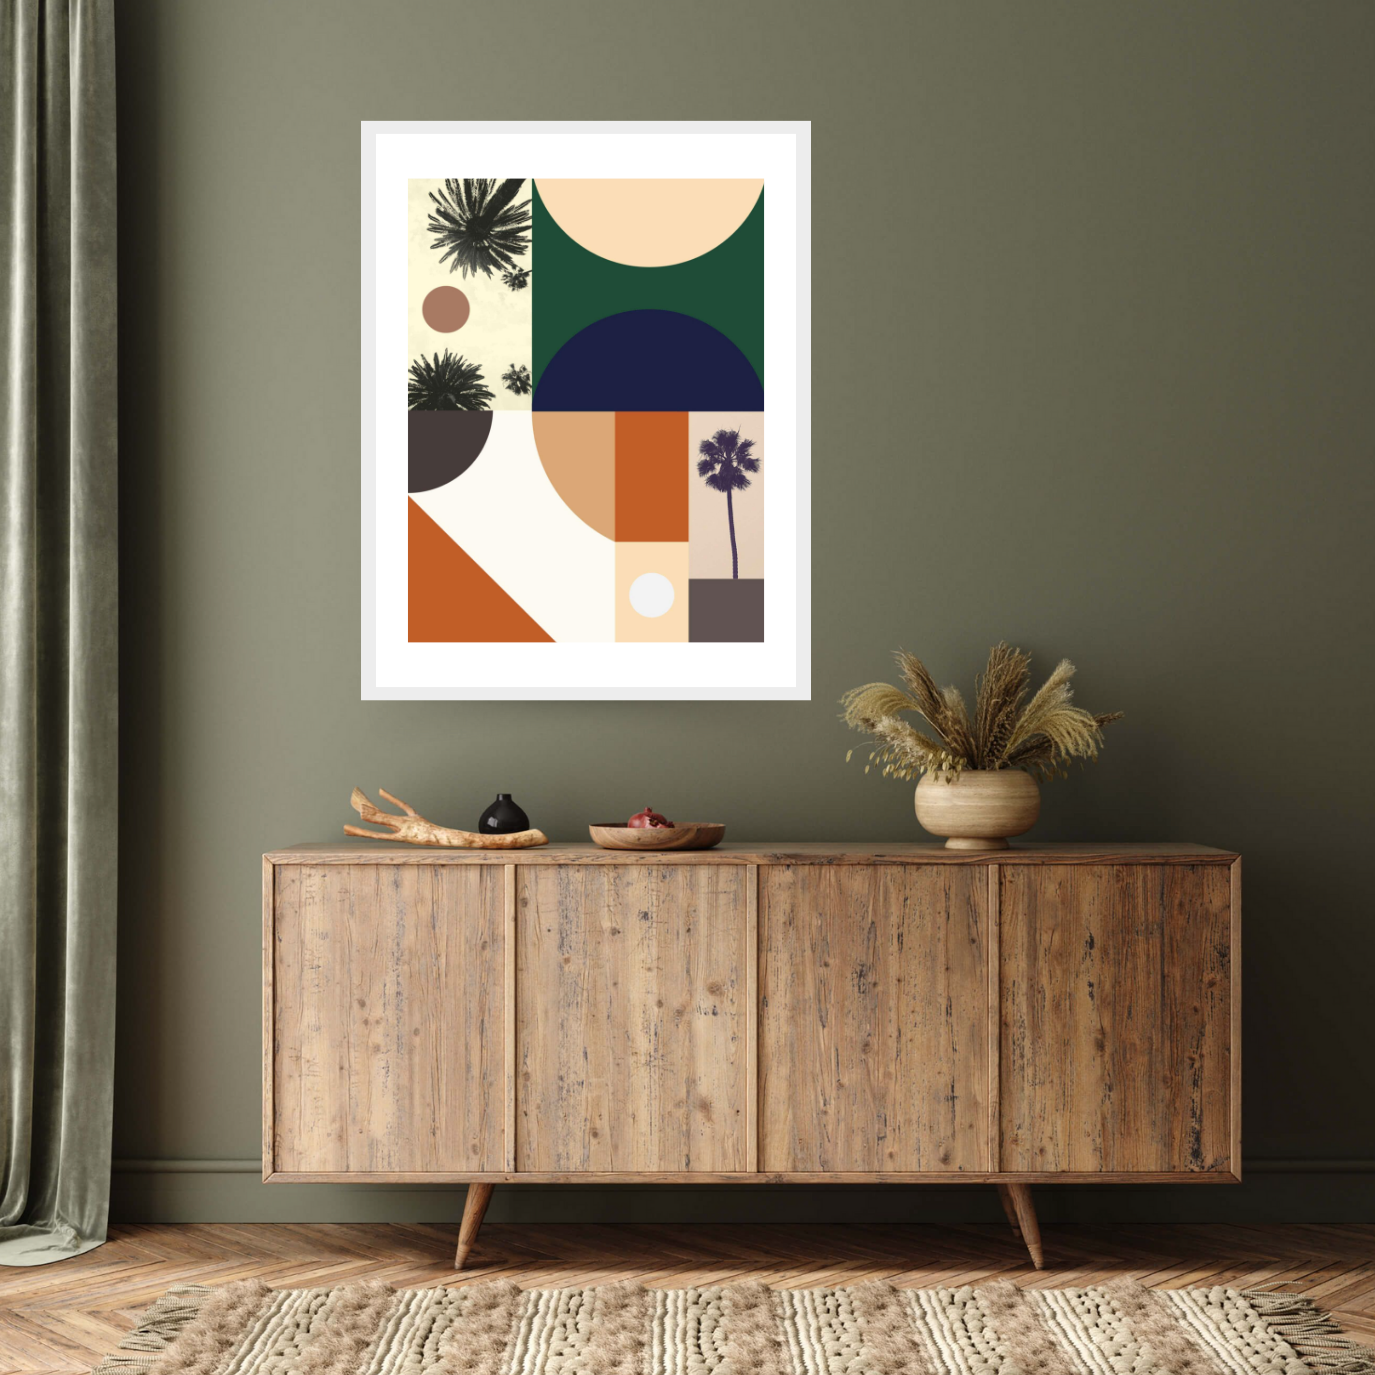 "Beverly Glen, 21st century" by George Rosaly. This white framed print, adorned with dark orange, blue, and green shapes against a neutral backdrop, encapsulates the neighbourhood's tranquillity. Palm trees seen from below add a touch of natural elegance.